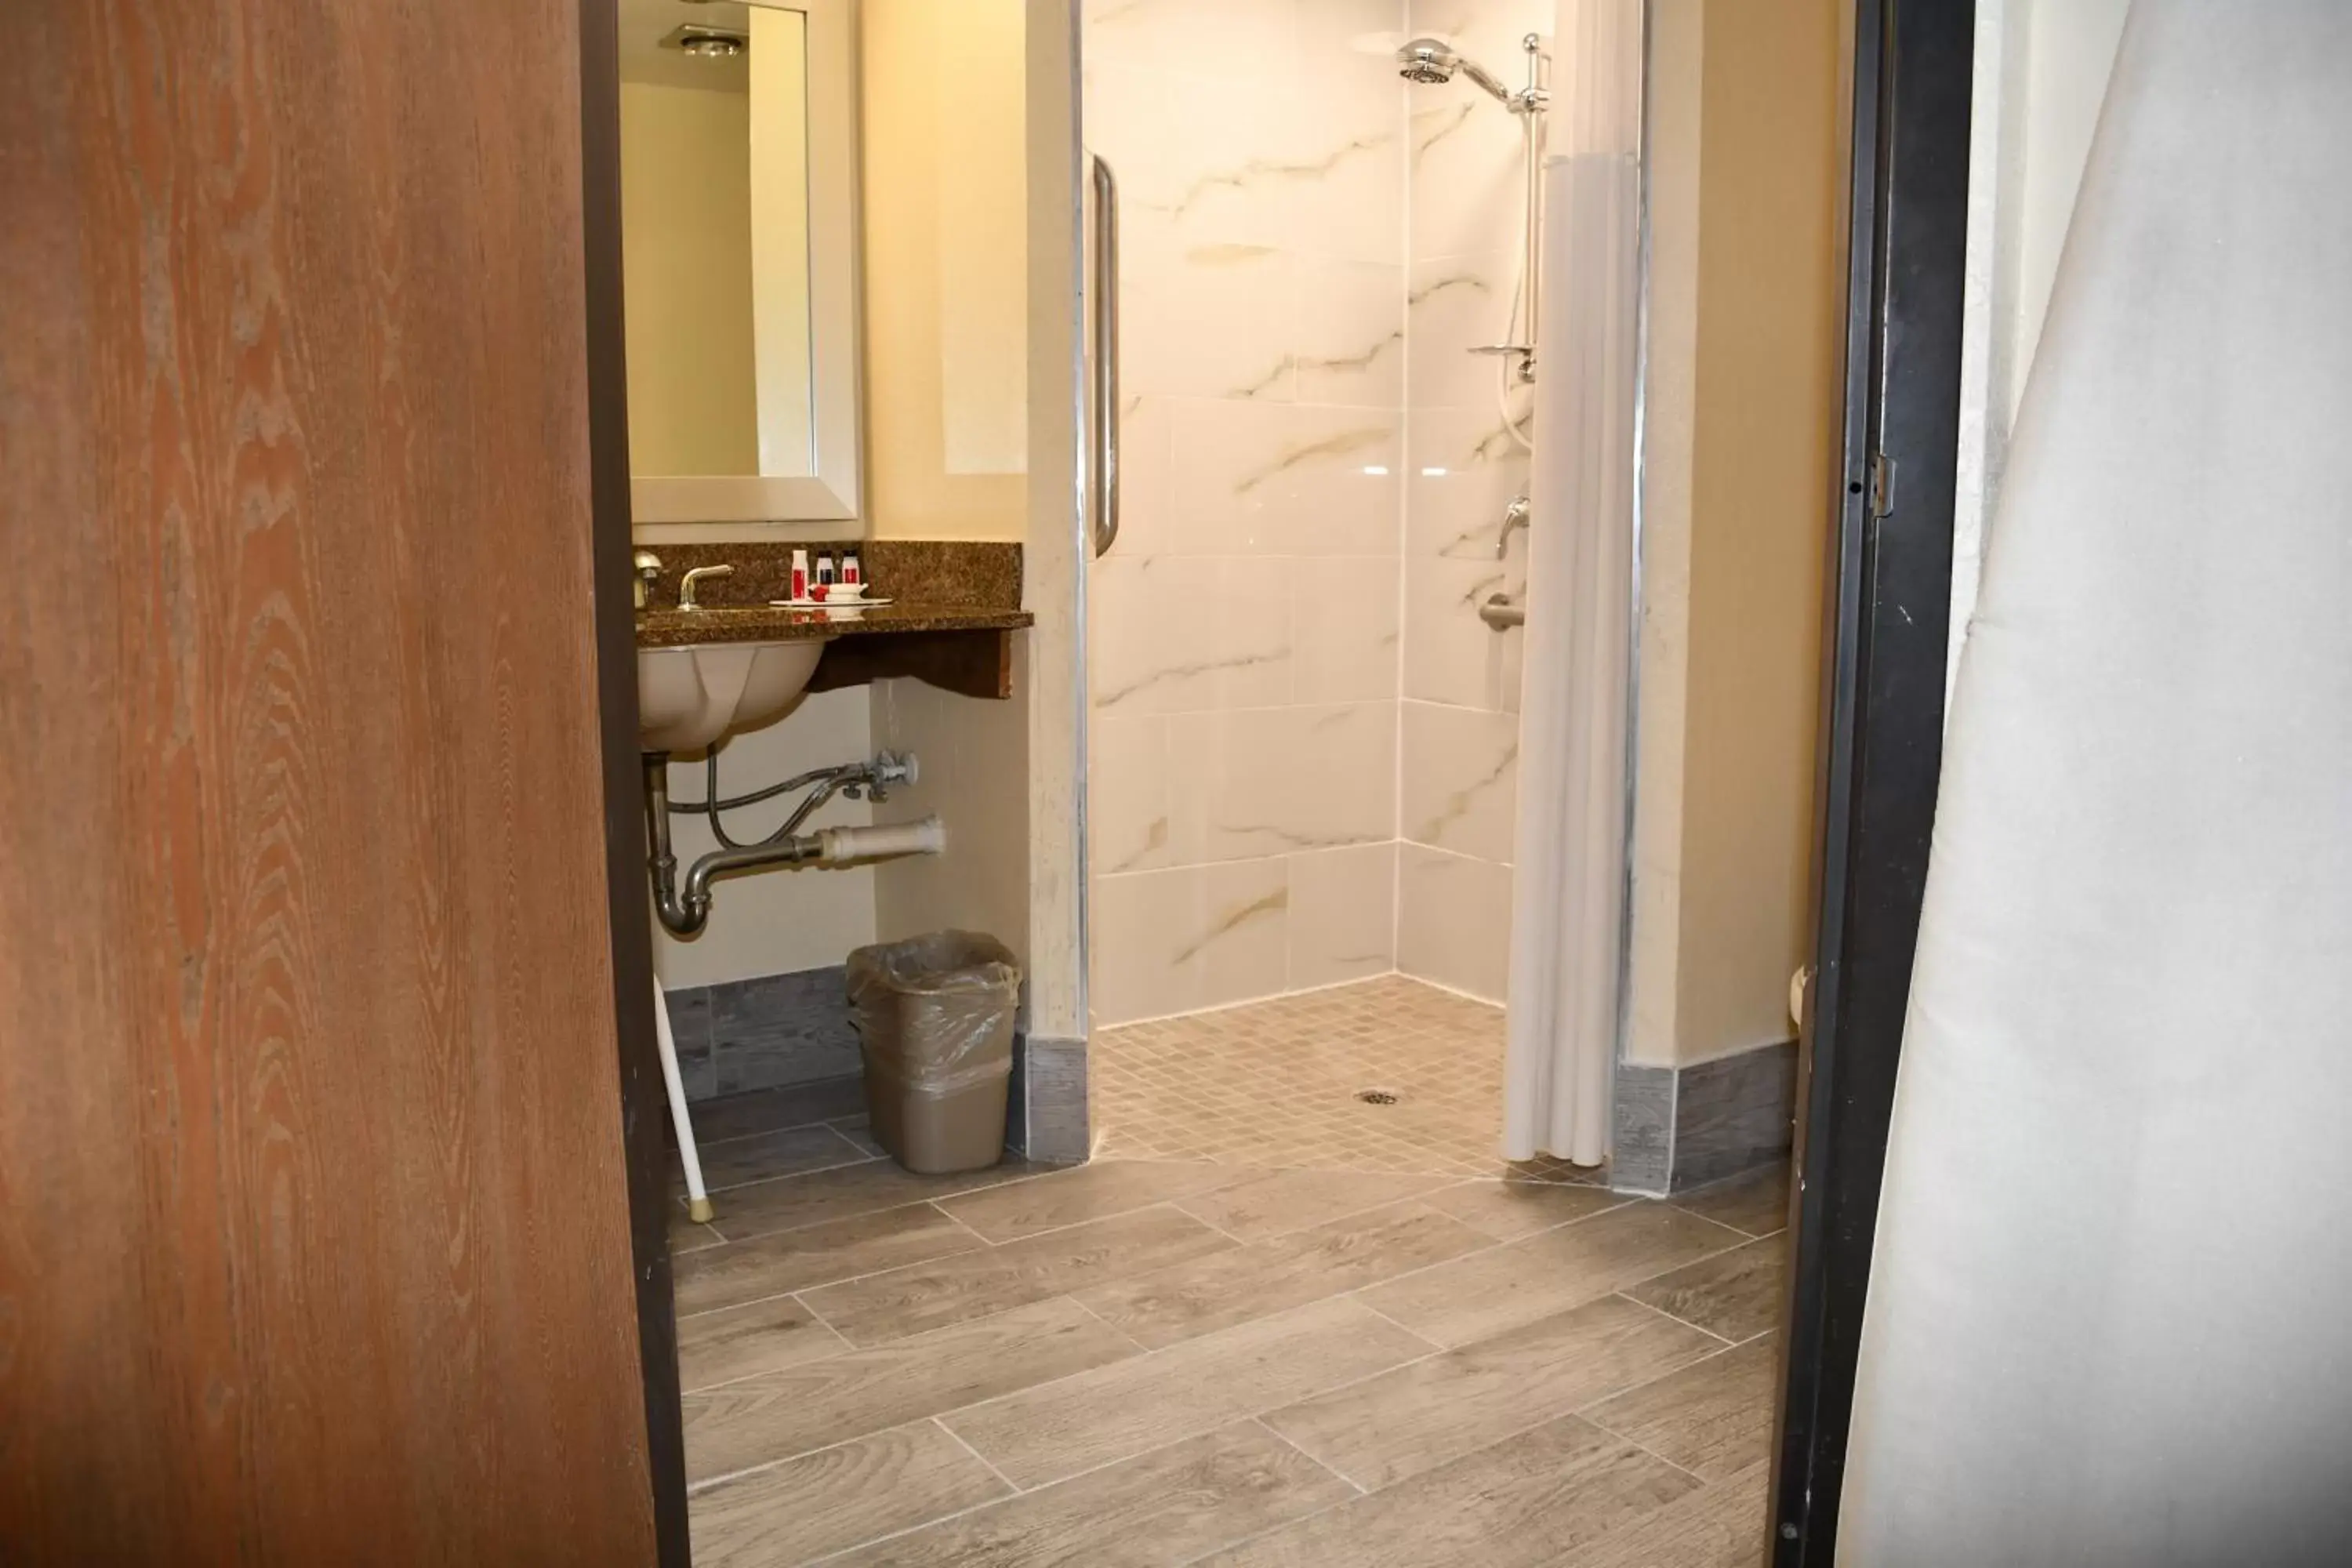 Bathroom in Days Inn by Wyndham Mounds View Twin Cities North